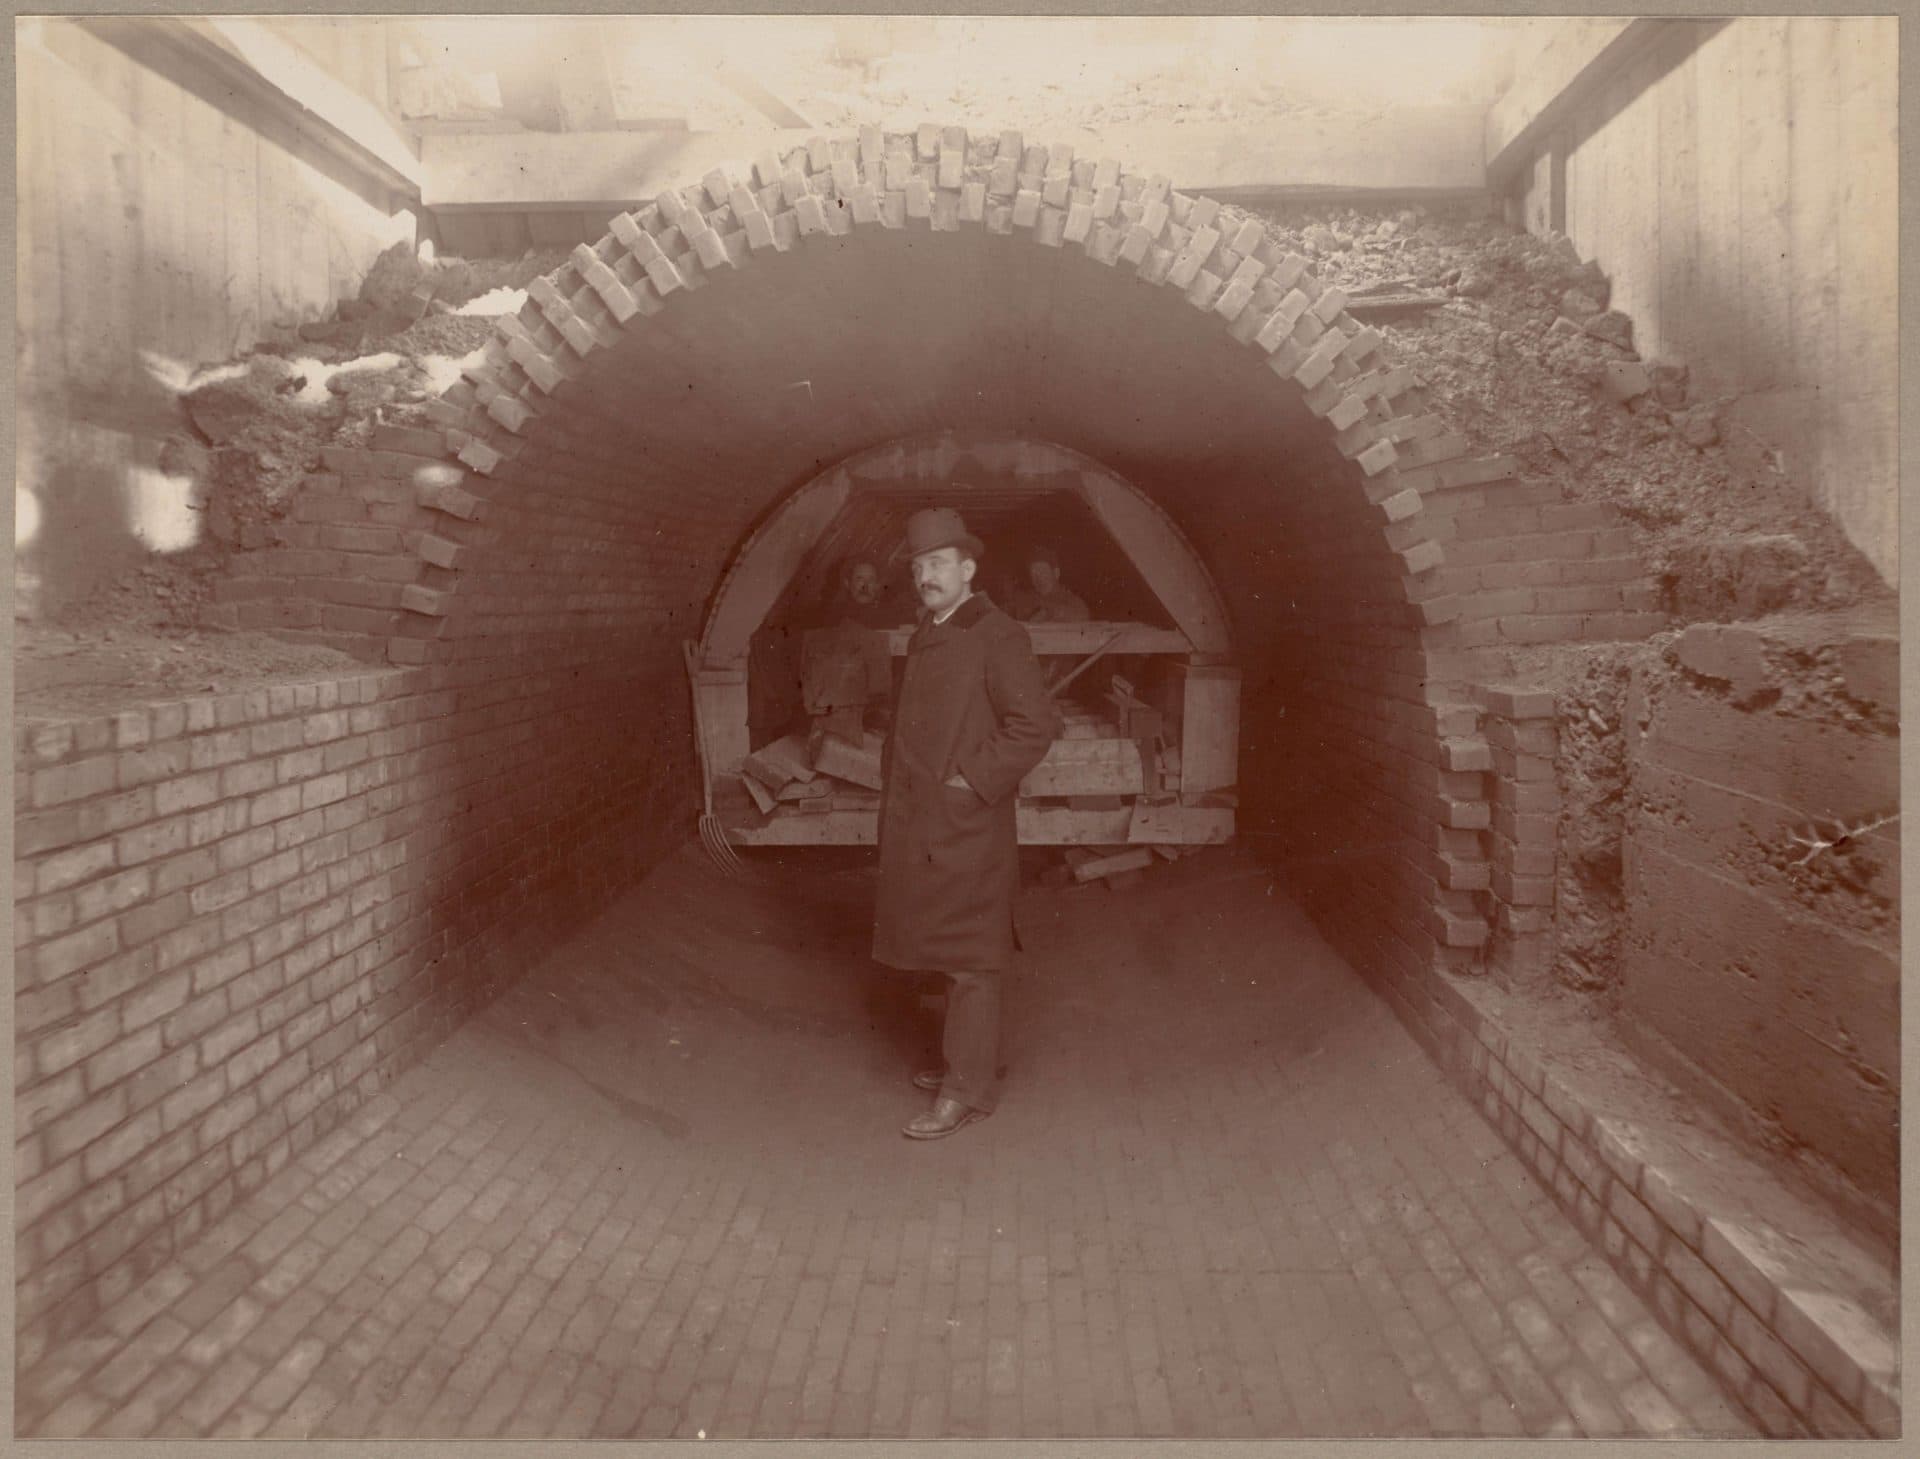 A man stands in front of a work crew during construction of a sewer line in the 1880s (Courtesy Boston Public Library)